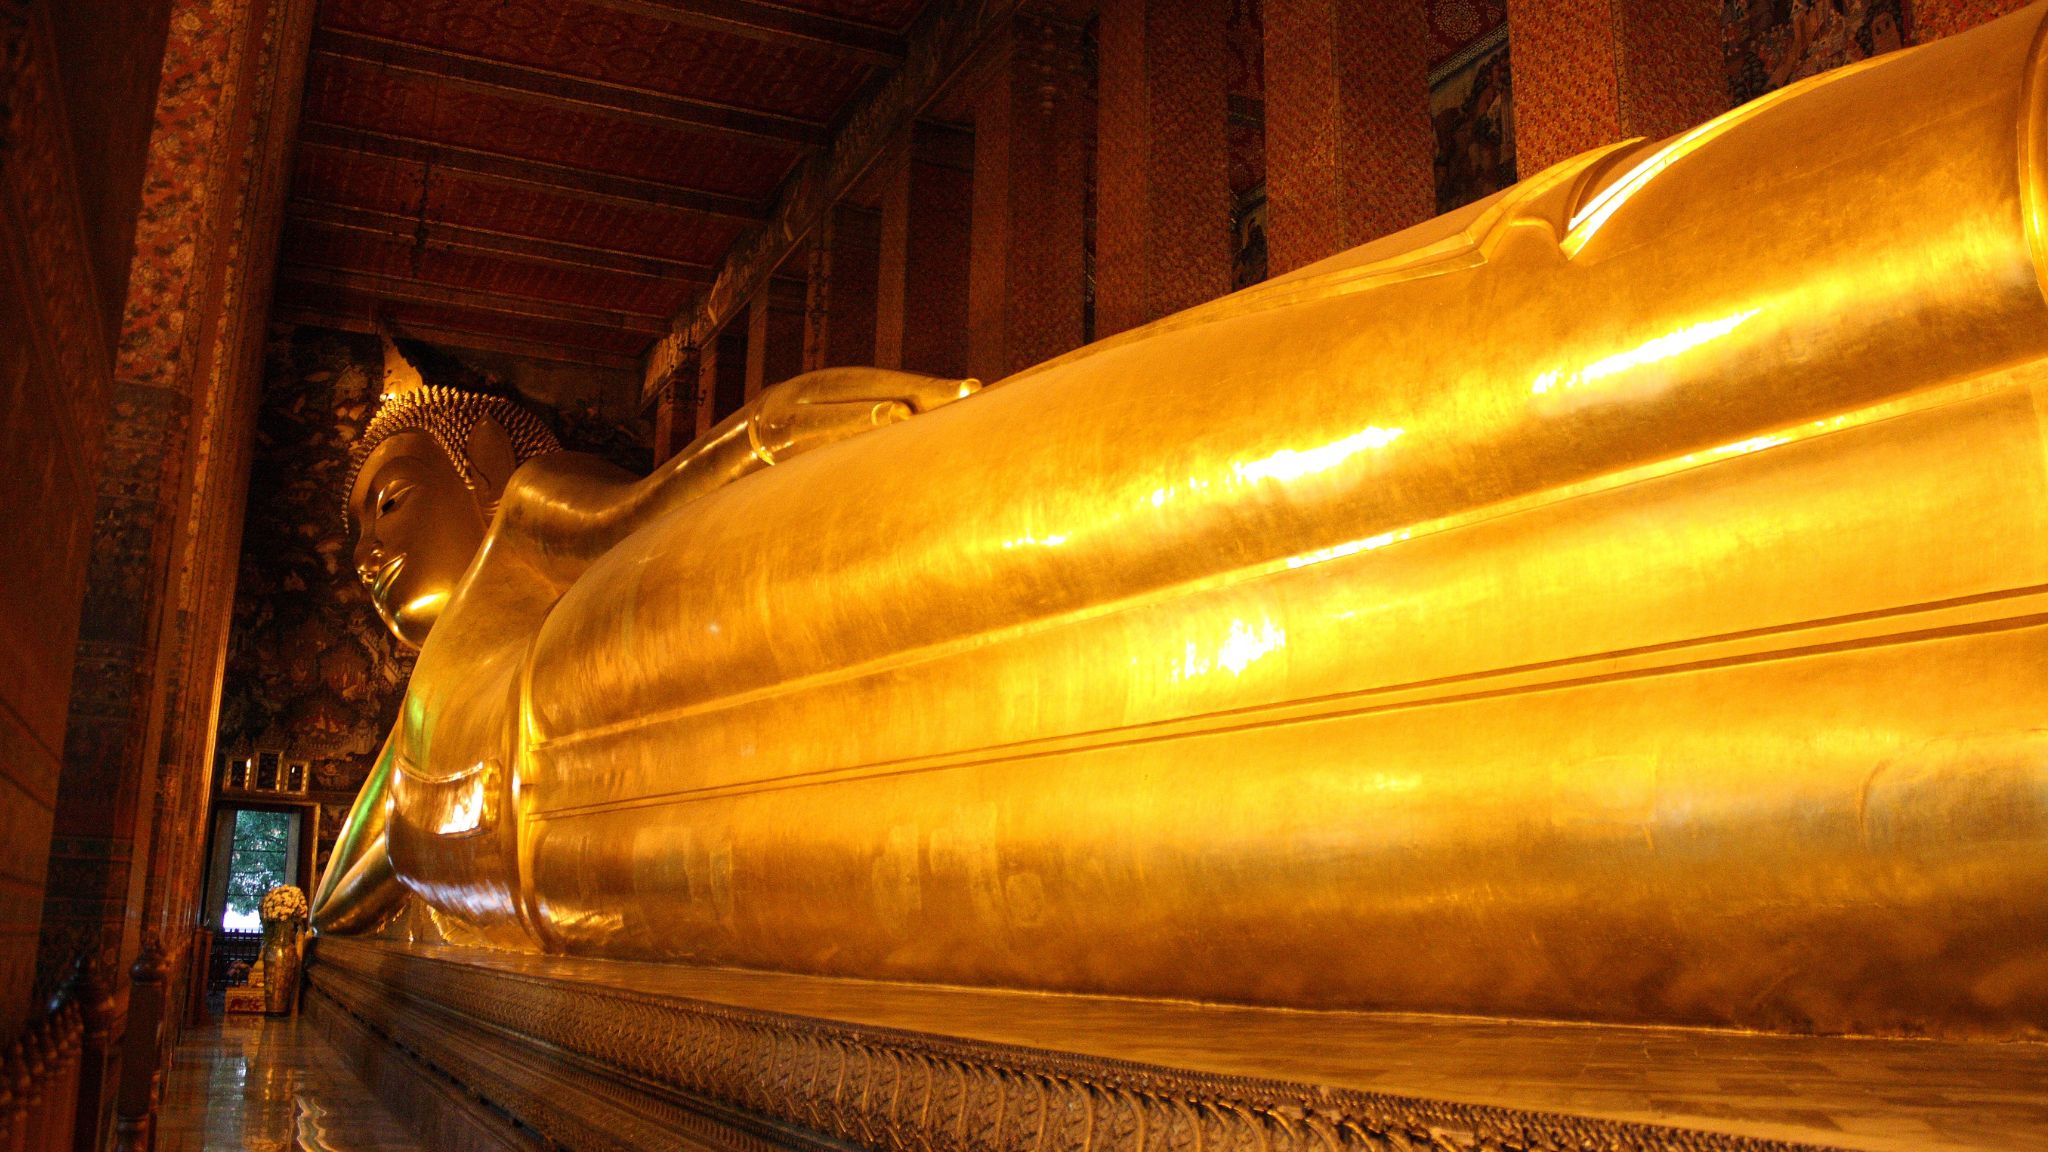 Day 2 The Giant Buddha Statue In Wat Pho